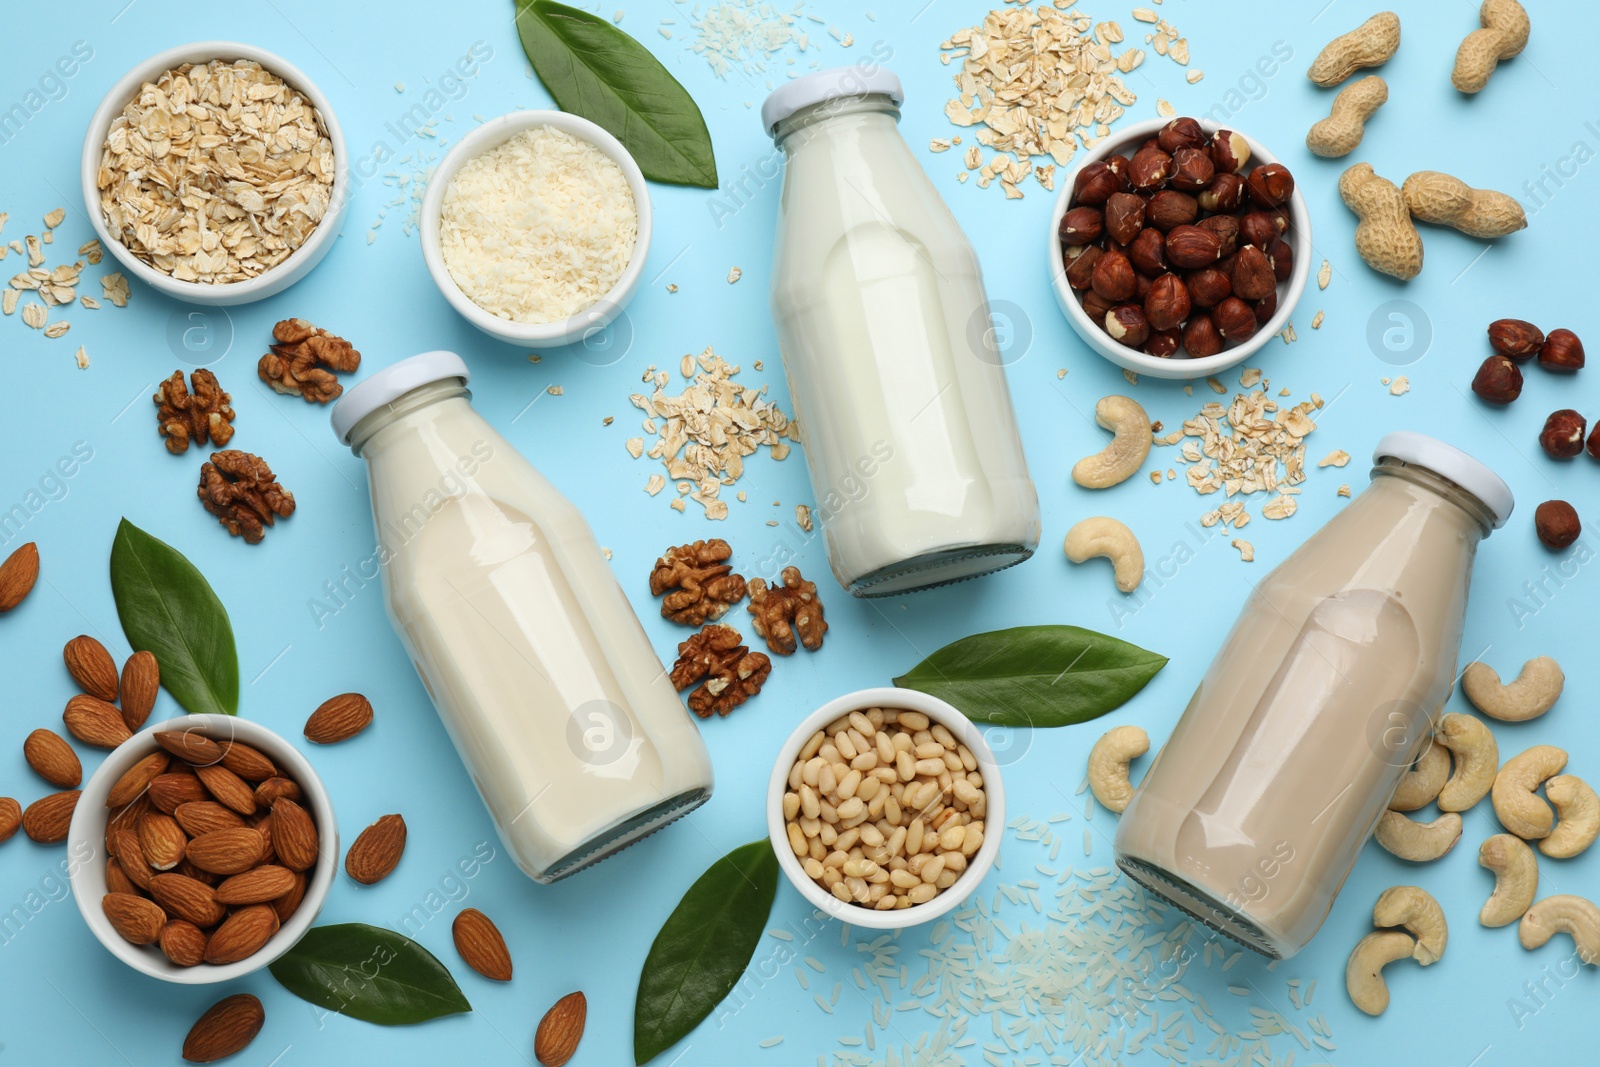 Photo of Different vegan milks and ingredients on light blue background, flat lay